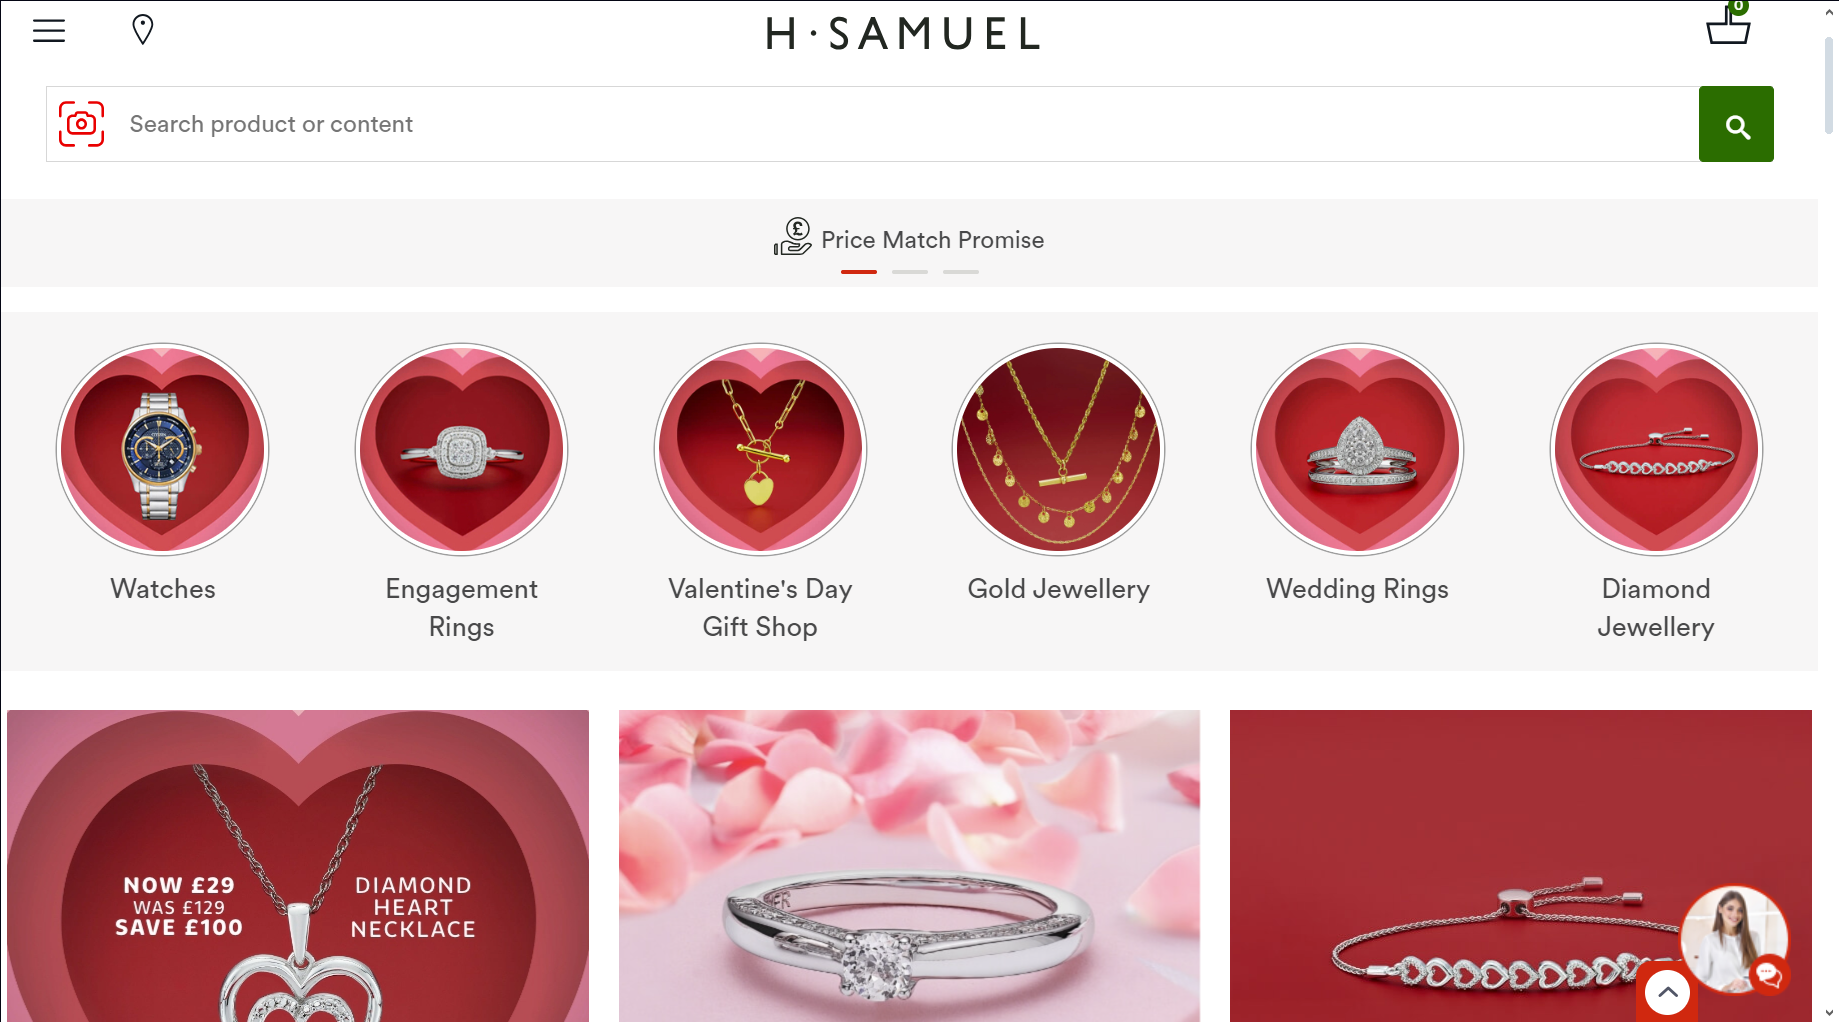 Visit H Samuel for Awesome Valentine’s Day Deals